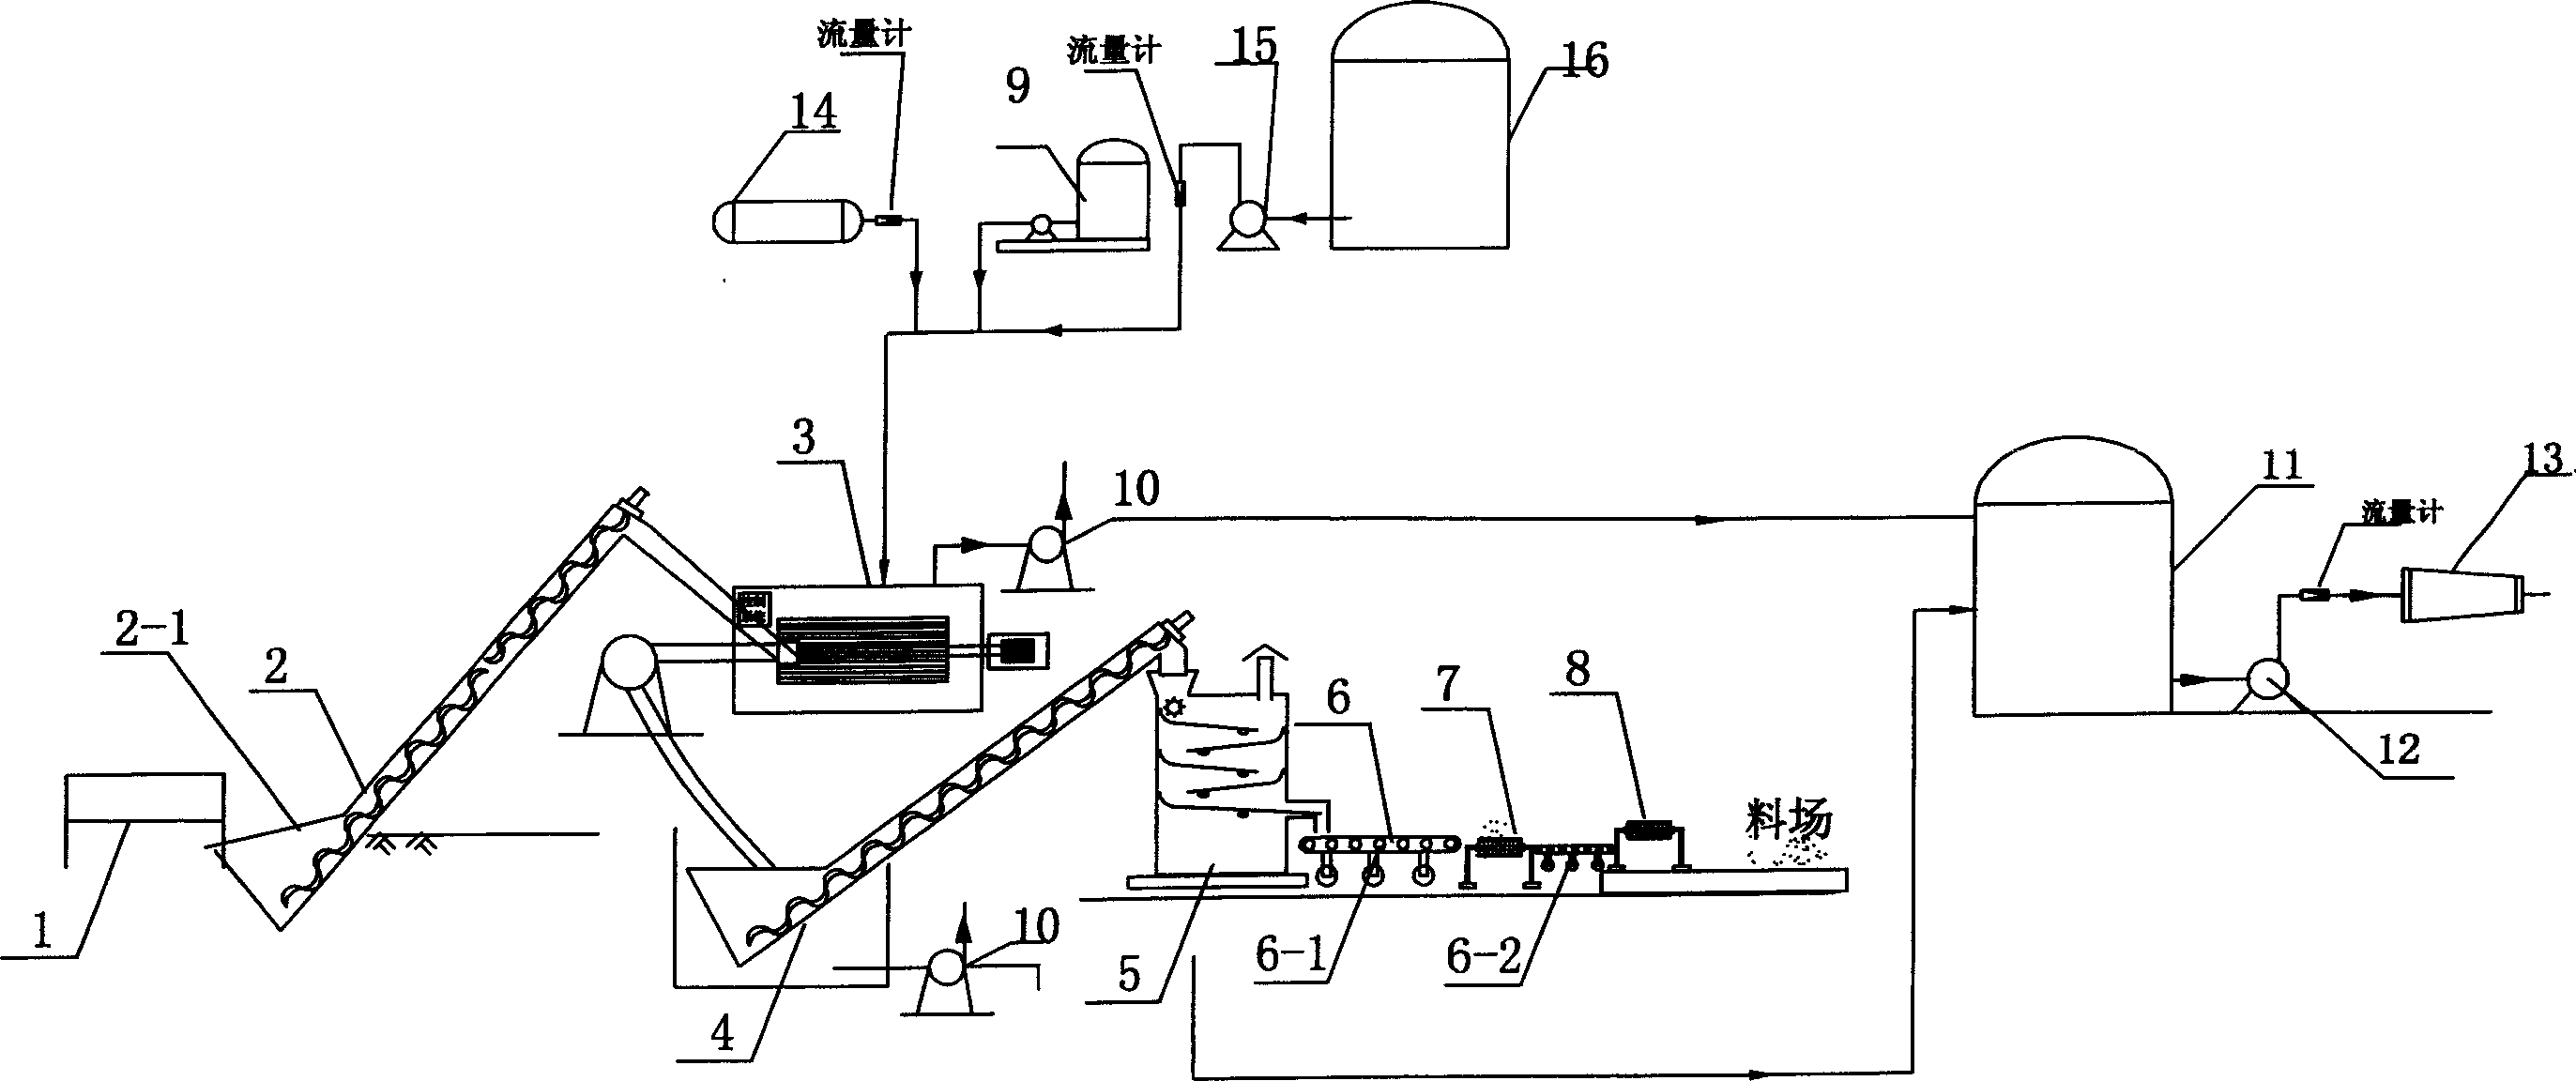 Recovery treatment system and method for oil field waste filtered substance